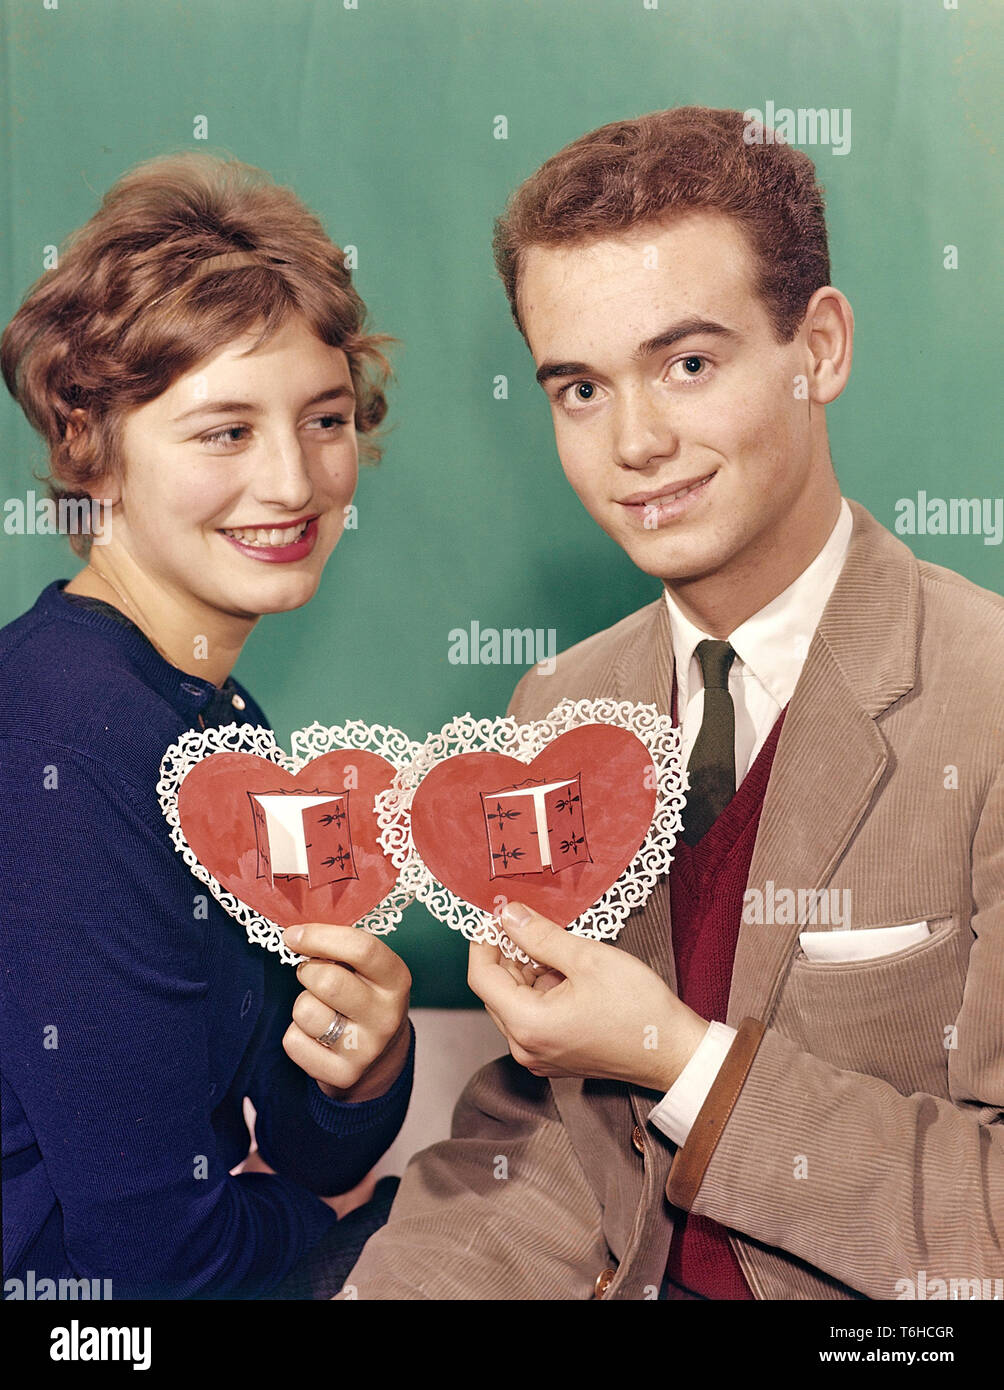 Couple of the 1950s. A young woman and man are each one holding heart shaped papers colored in red with ornaments around it. An illustration for Valentine's day. Sweden 1950s. Stock Photo